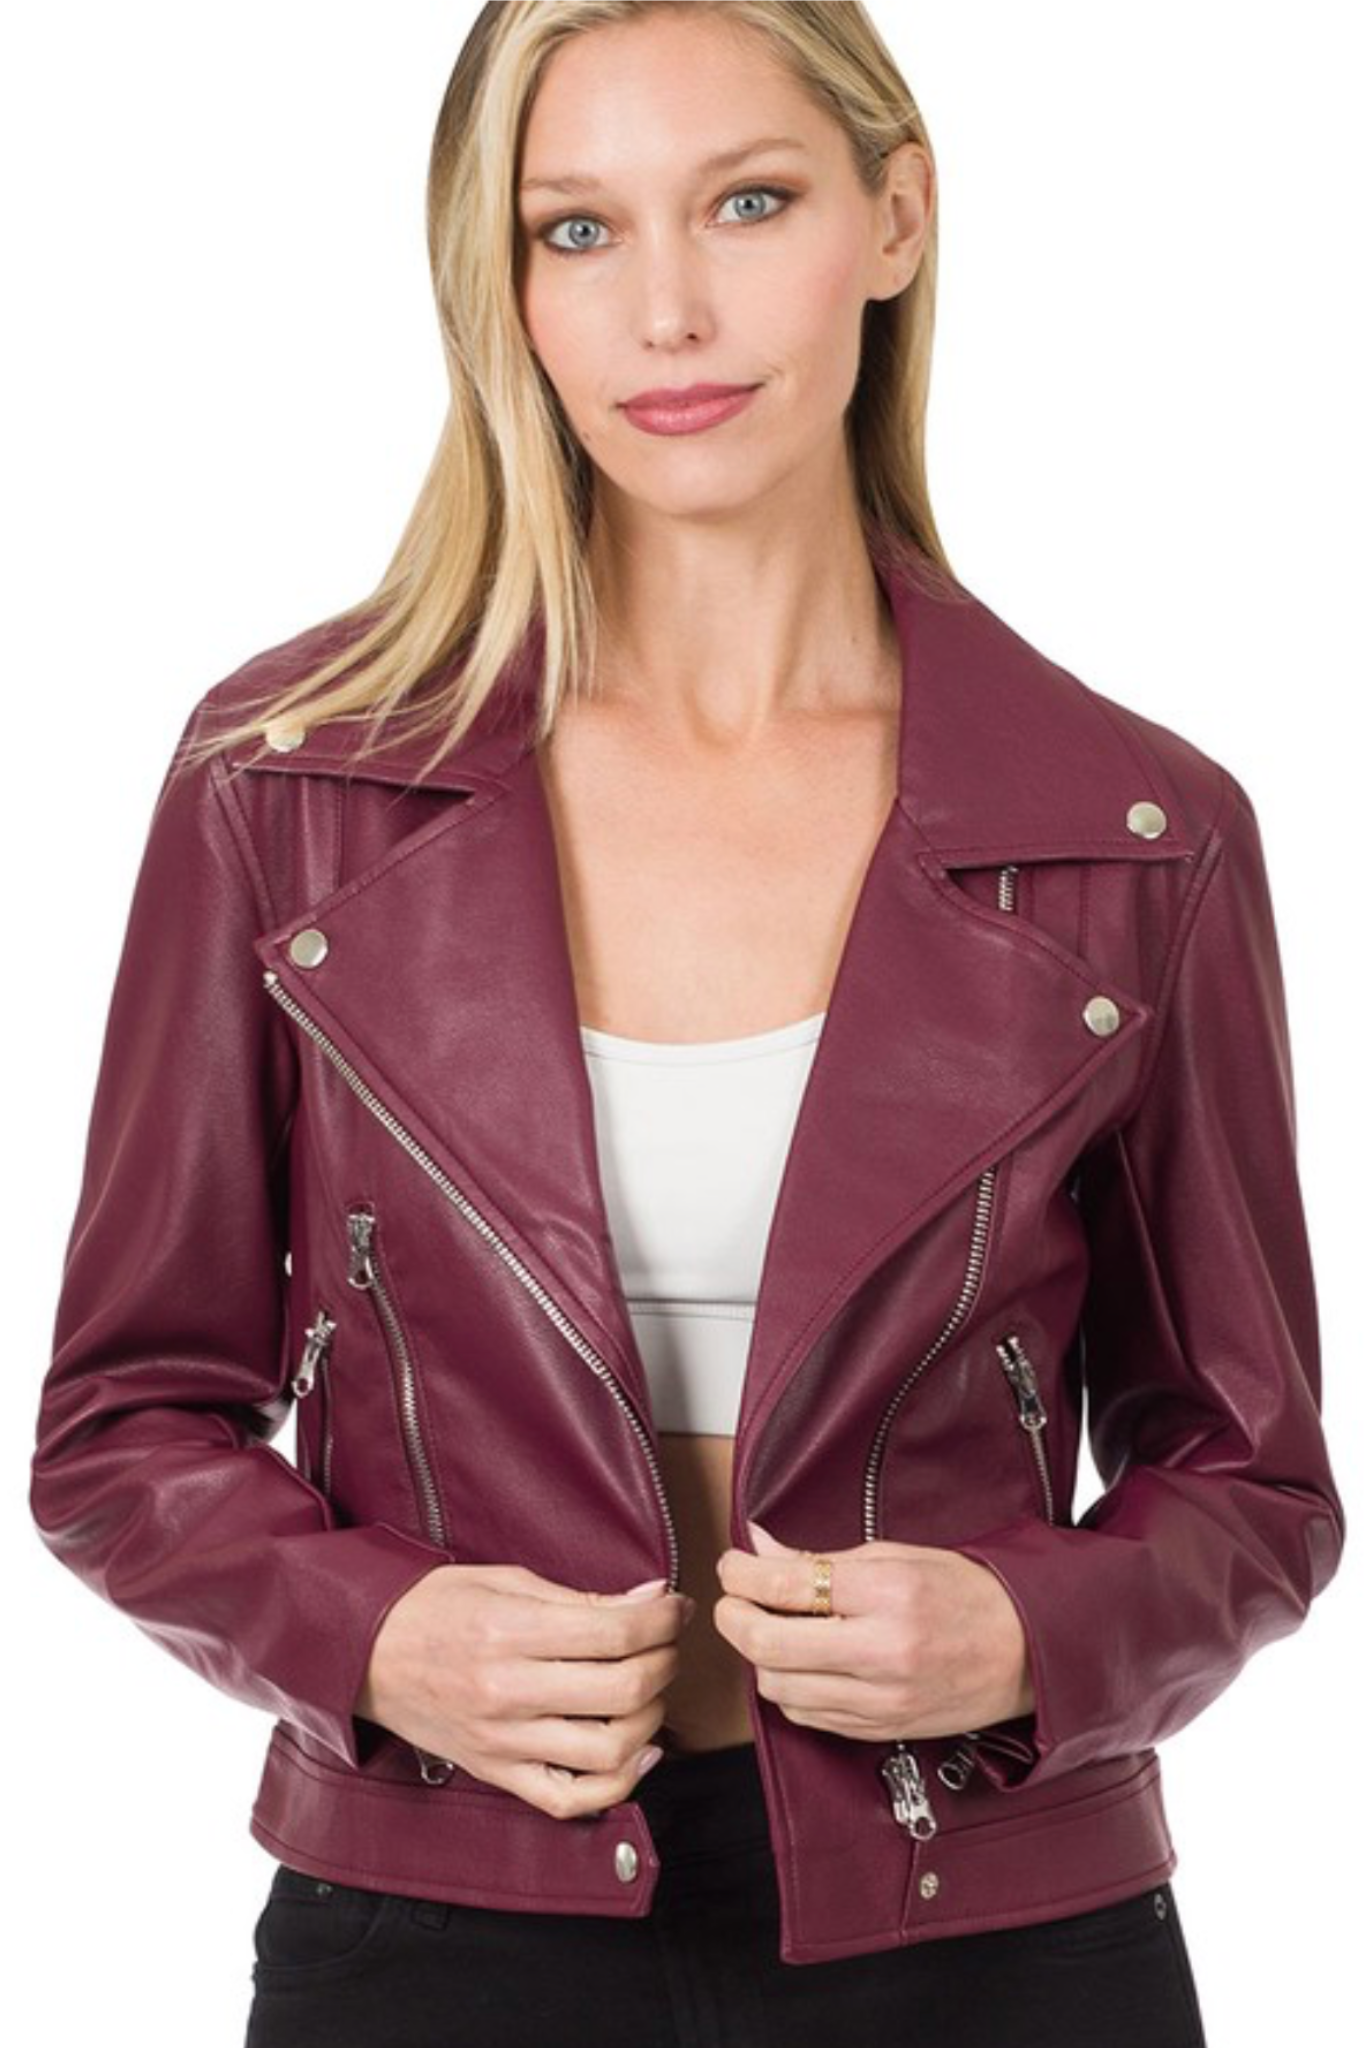 What's not to love about a Vegan Leather Moto Jacket! This gorgeous Color and the zipper details make our Addicted to Danger the Ultimate Statement Piece!